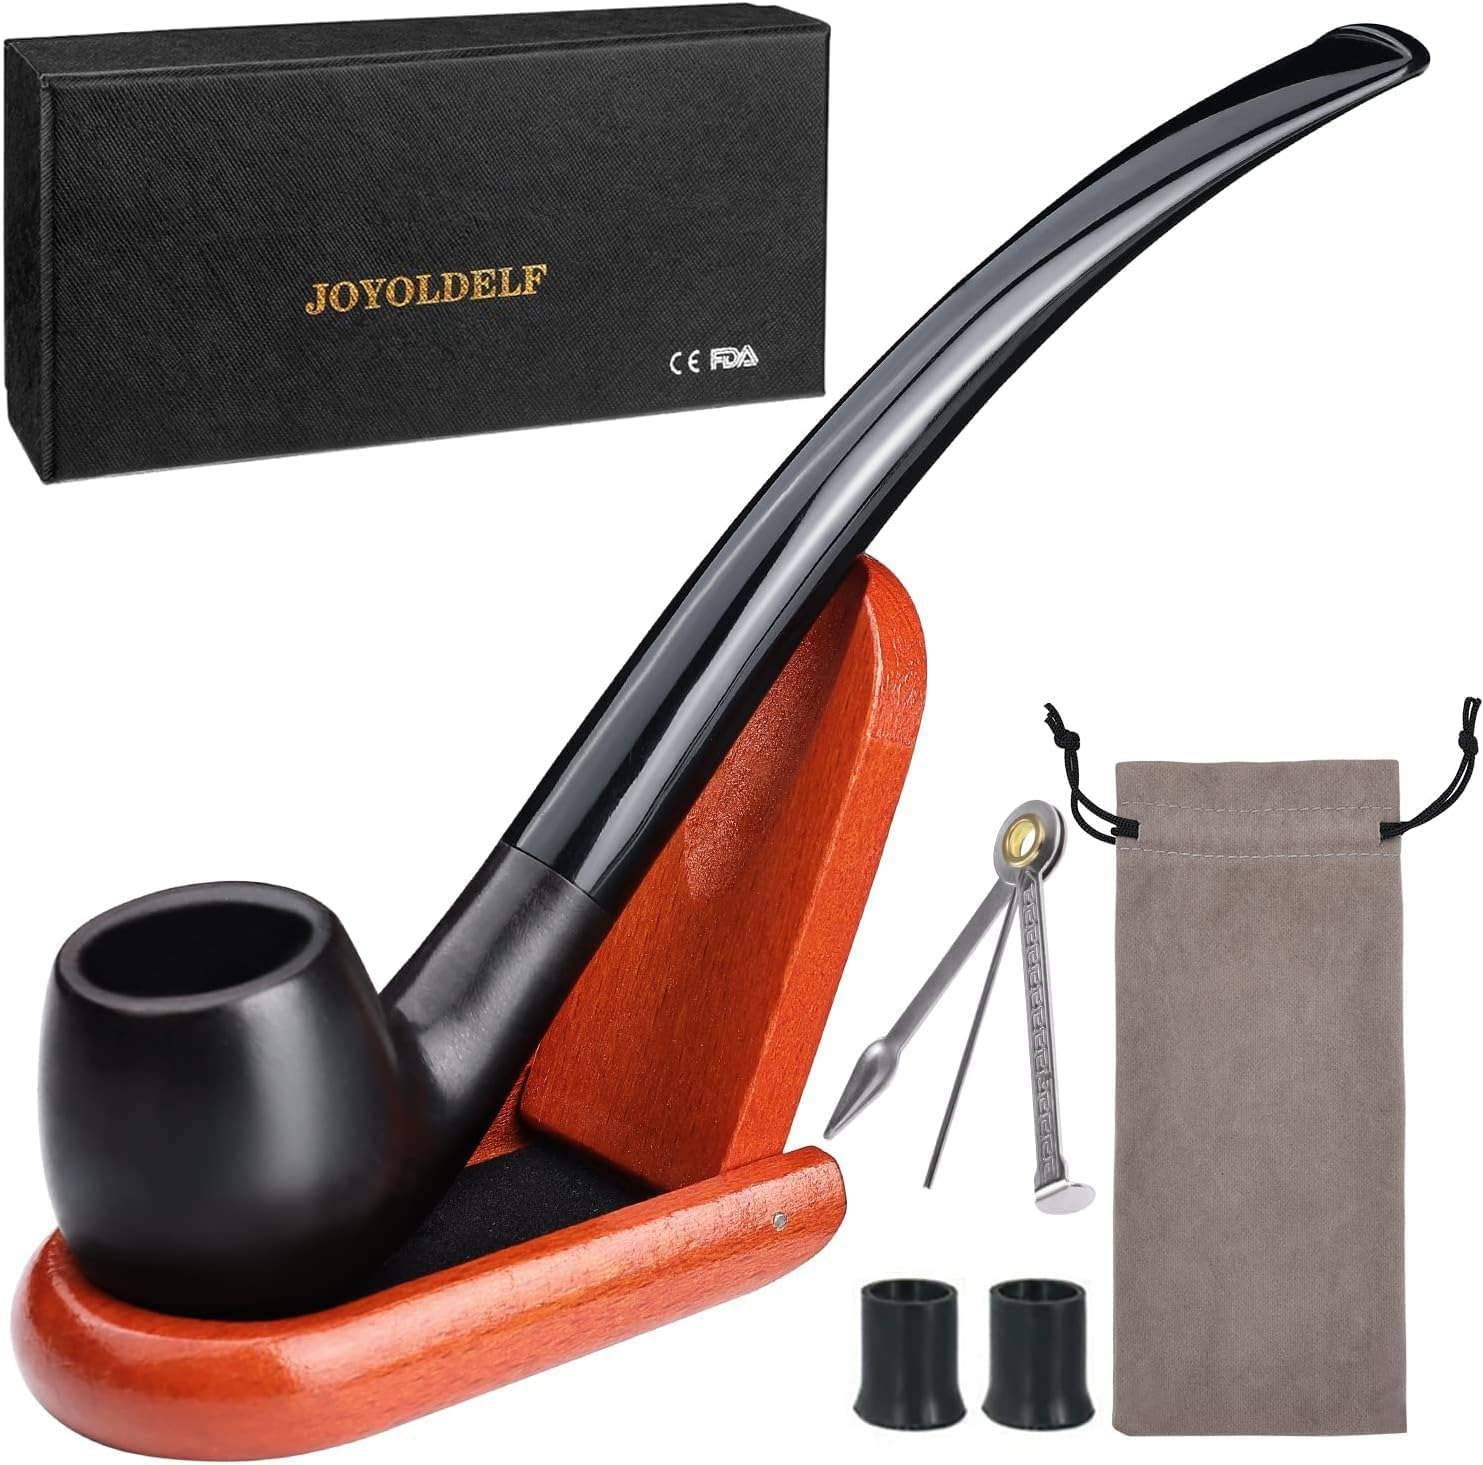 Joyoldelf Tobacco Pipe, Luxury Wooden Smoking Pipe with Tobacco Pipe Stand, Ebon